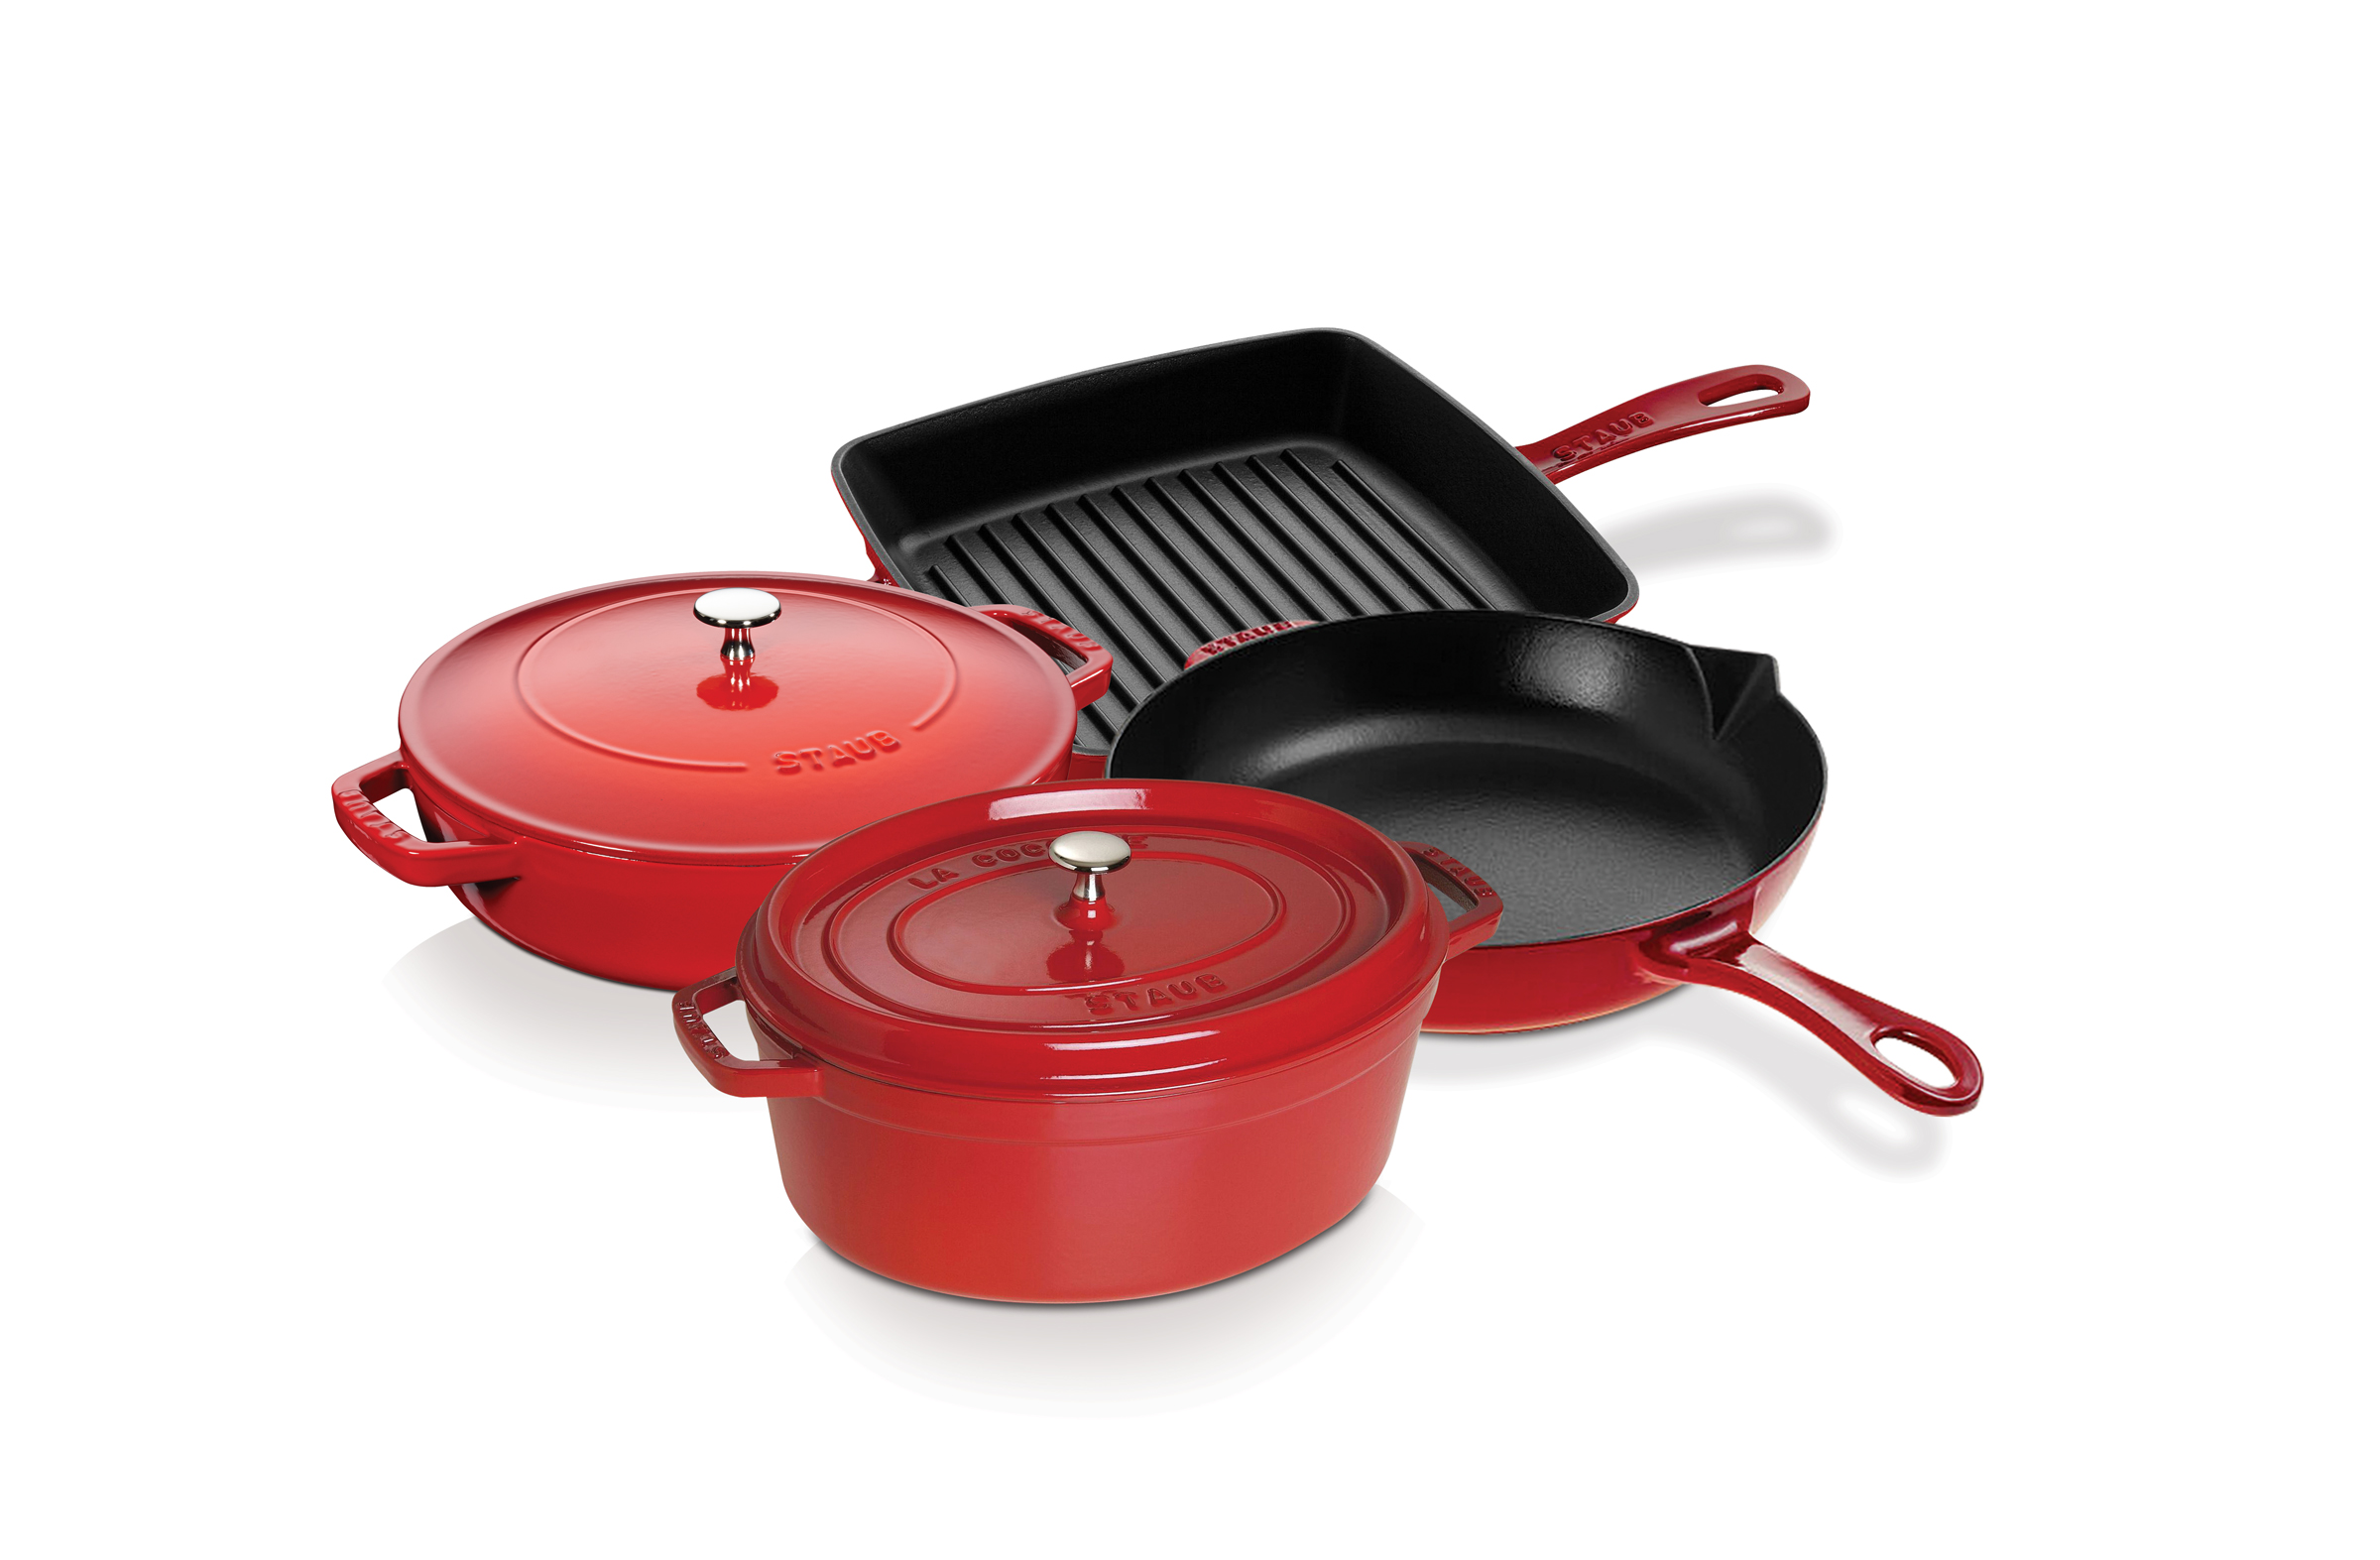 A Staub Cookware Set Valued at $1500